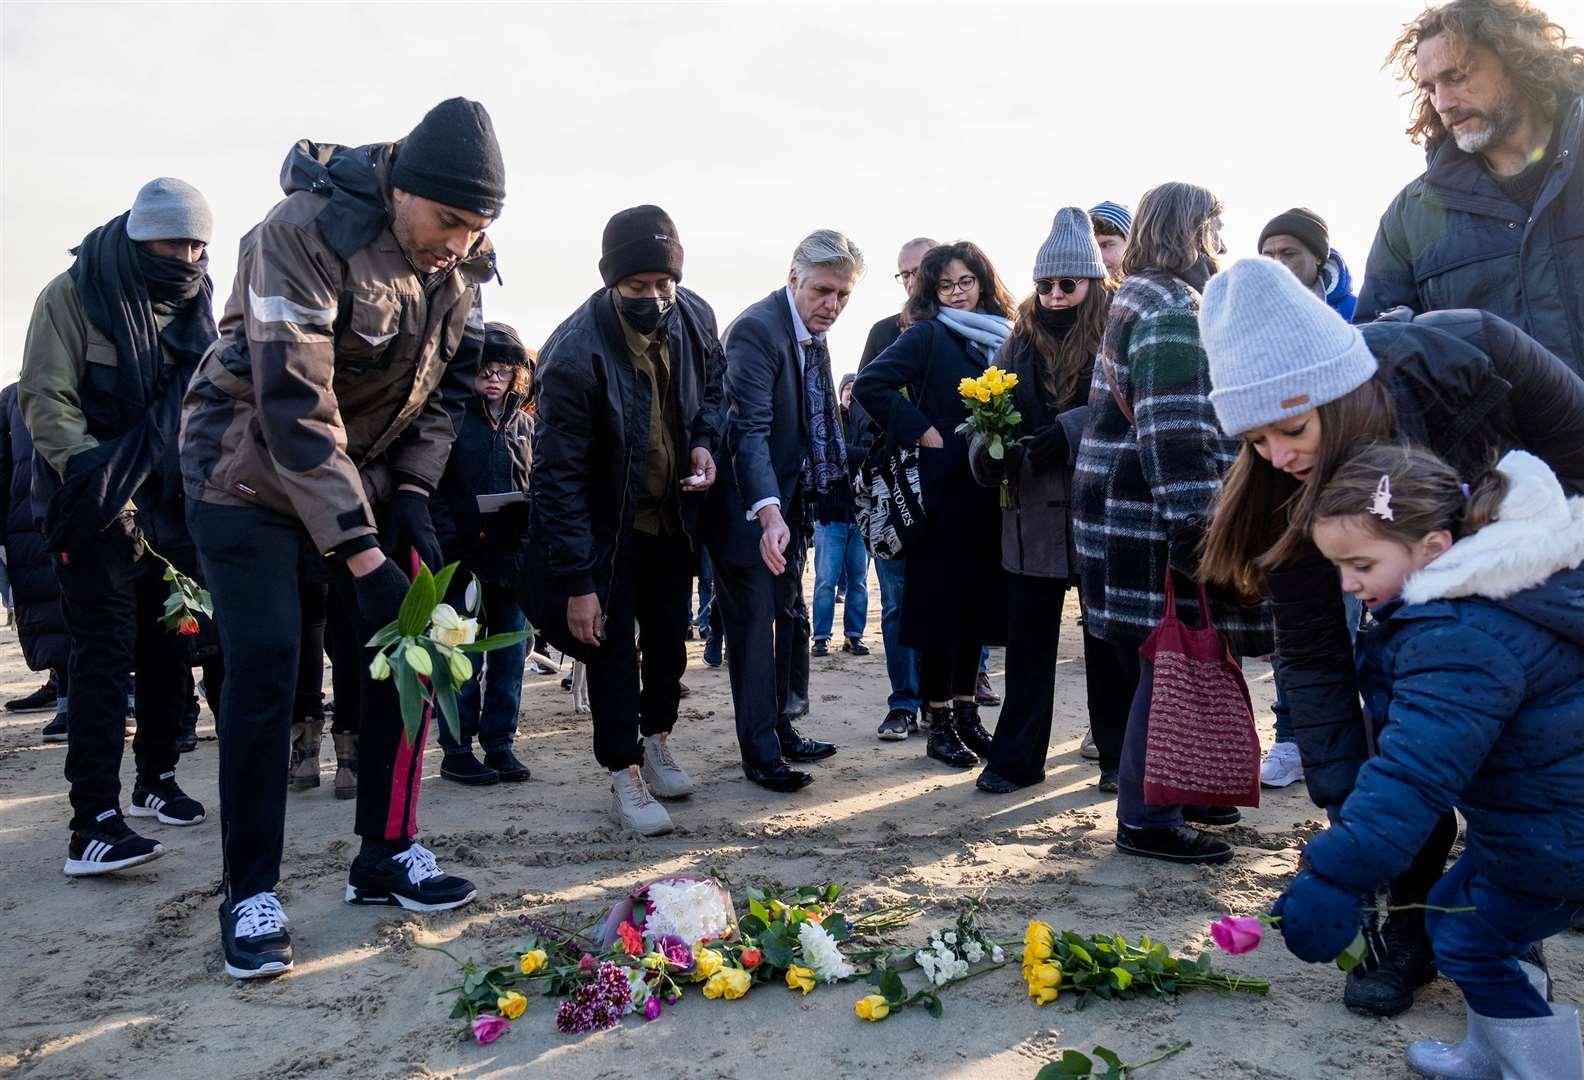 People at a memorial event in Folkestone following the tragedy in November 2021. Picture: Andy Aitchison